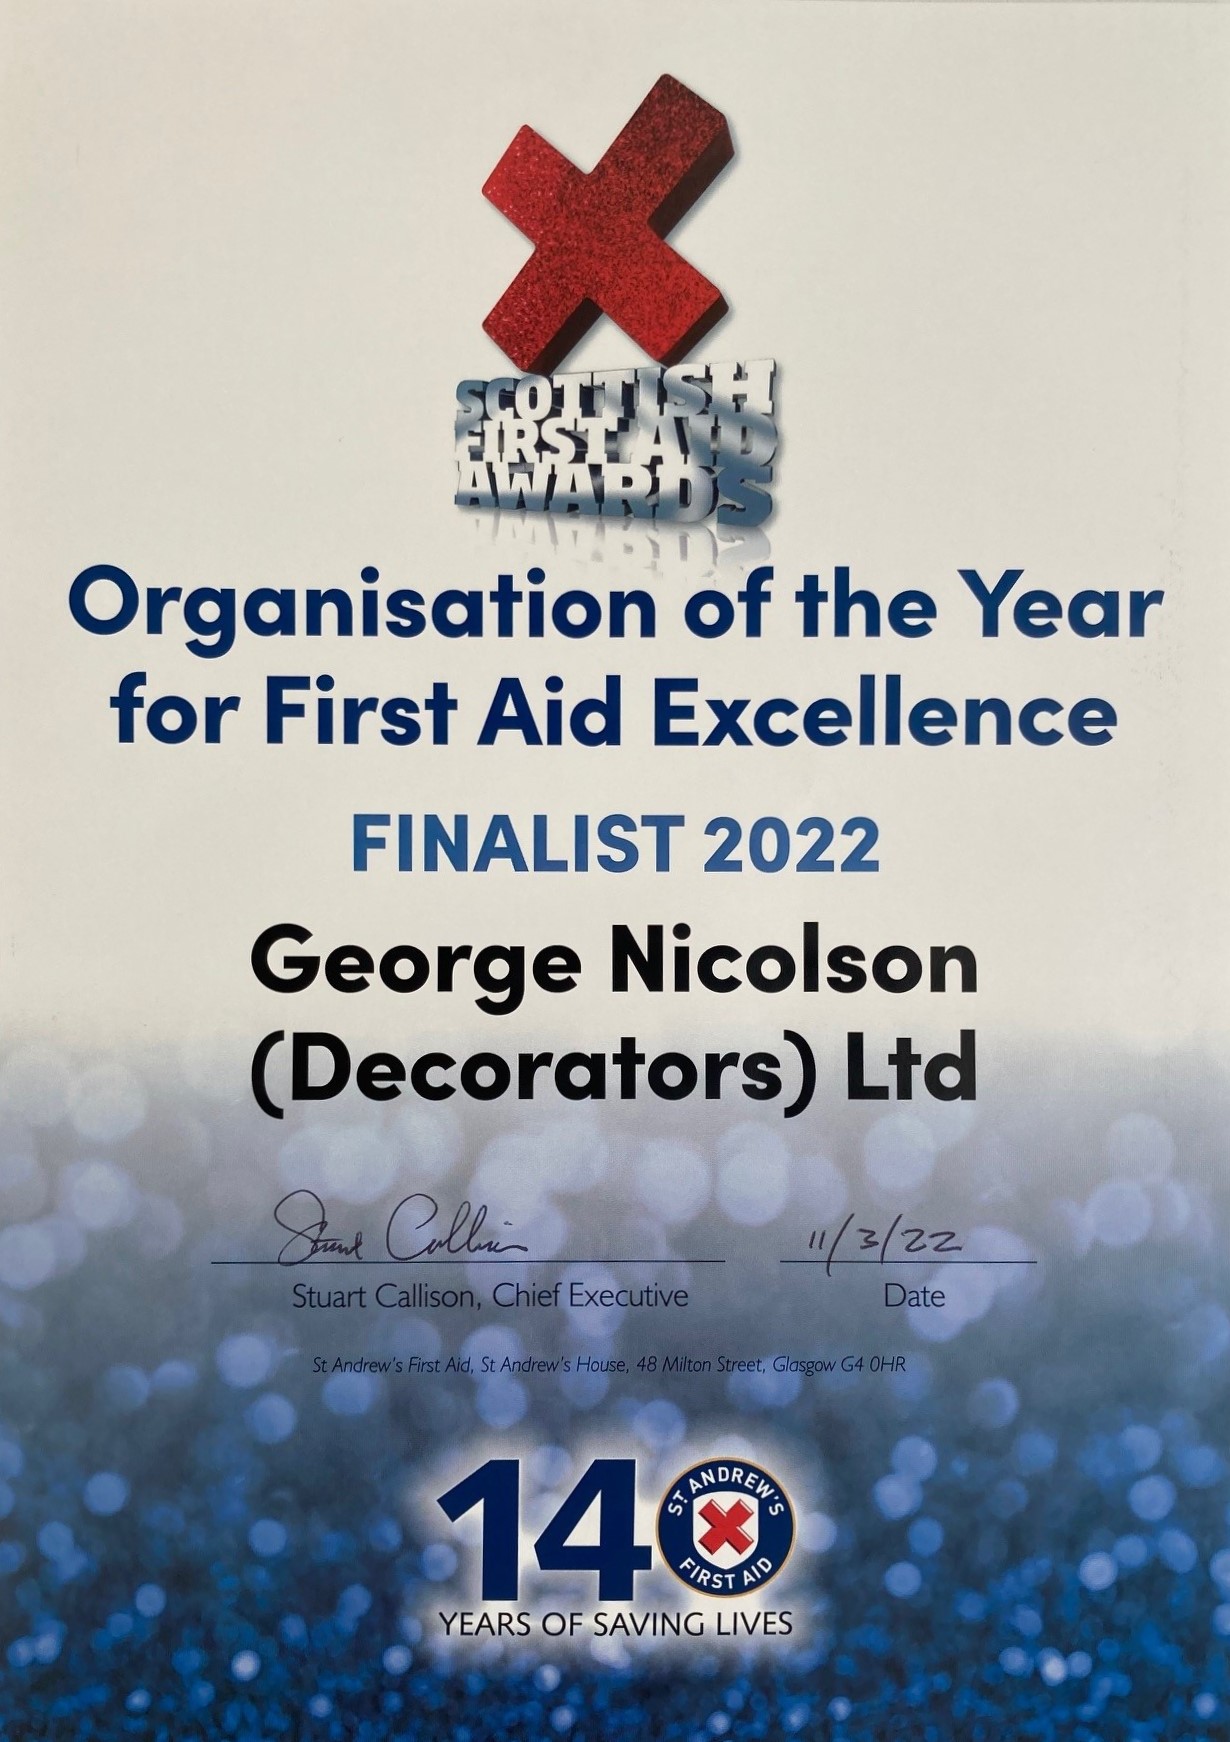 St Andrew's First Aid Awards 2022 - Finalist Certificate 2022